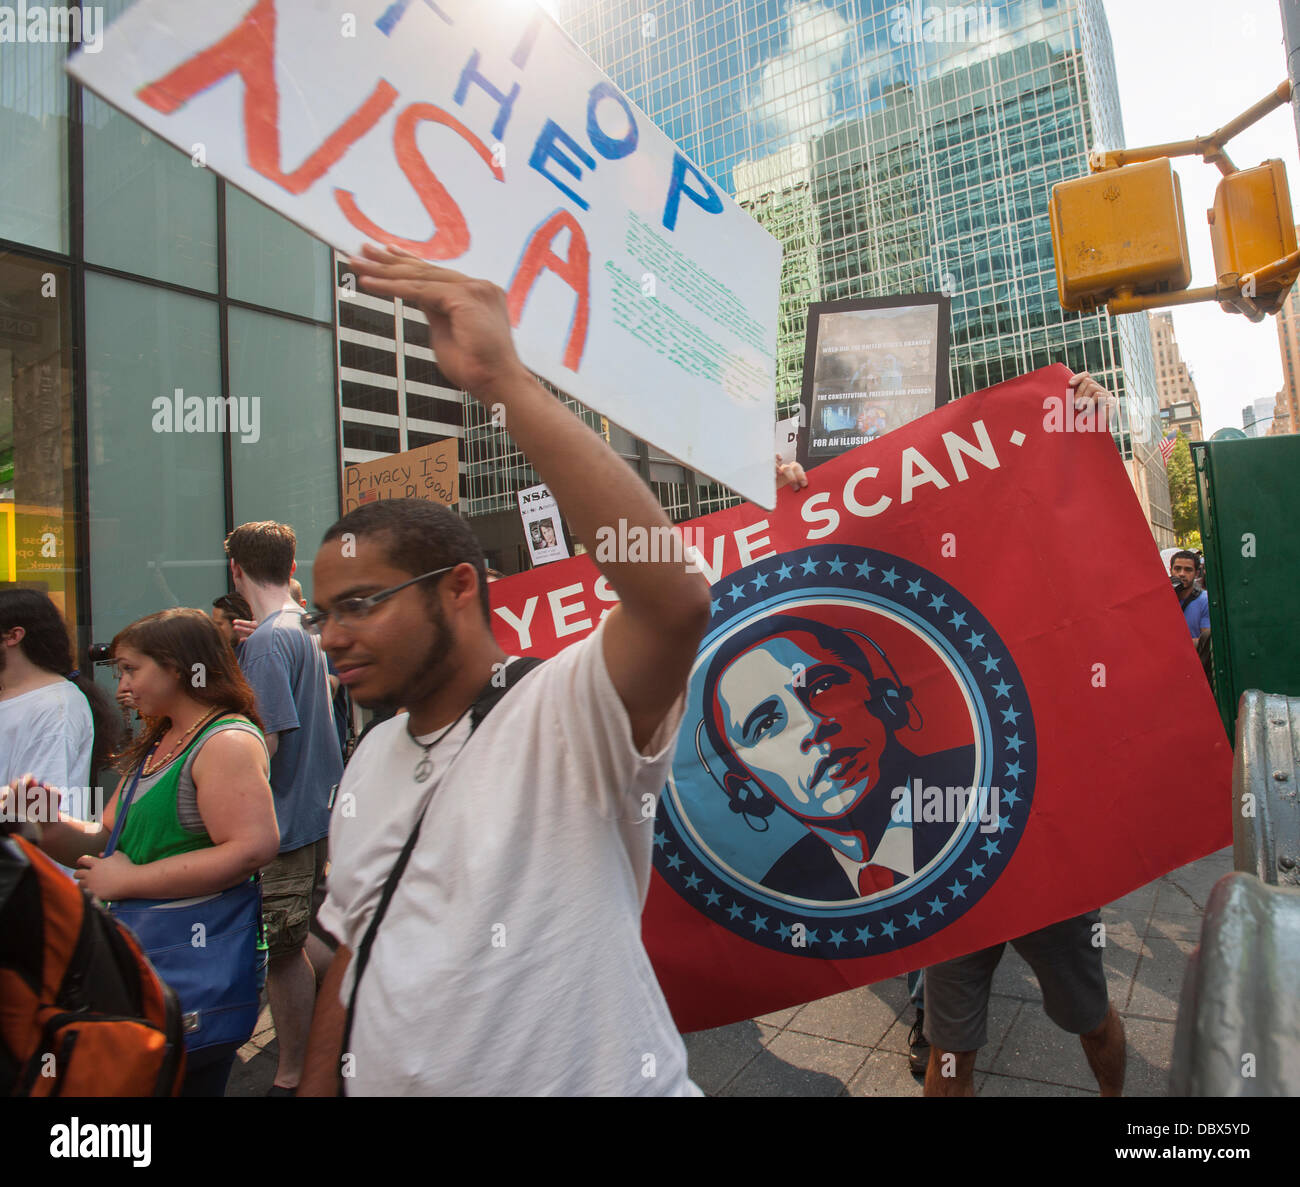 New York, New York. 04th Aug, 2013. Protesters in midtown Manhattan in New York demonstrate against the National Security Agency's surveillance of Americans' email and telephone conversations on Sunday, August 4, 2013. The protest was organized by a group called 'Restore the Fourth' referring to the Fourth Amendment of the Constitution which protects citizens against unreasonable searches by the government. Many citizens are opposed to the NSA activities and the events which took place around the country were called '1984 Day'. Credit:  Richard Levine/Alamy Live News Stock Photo